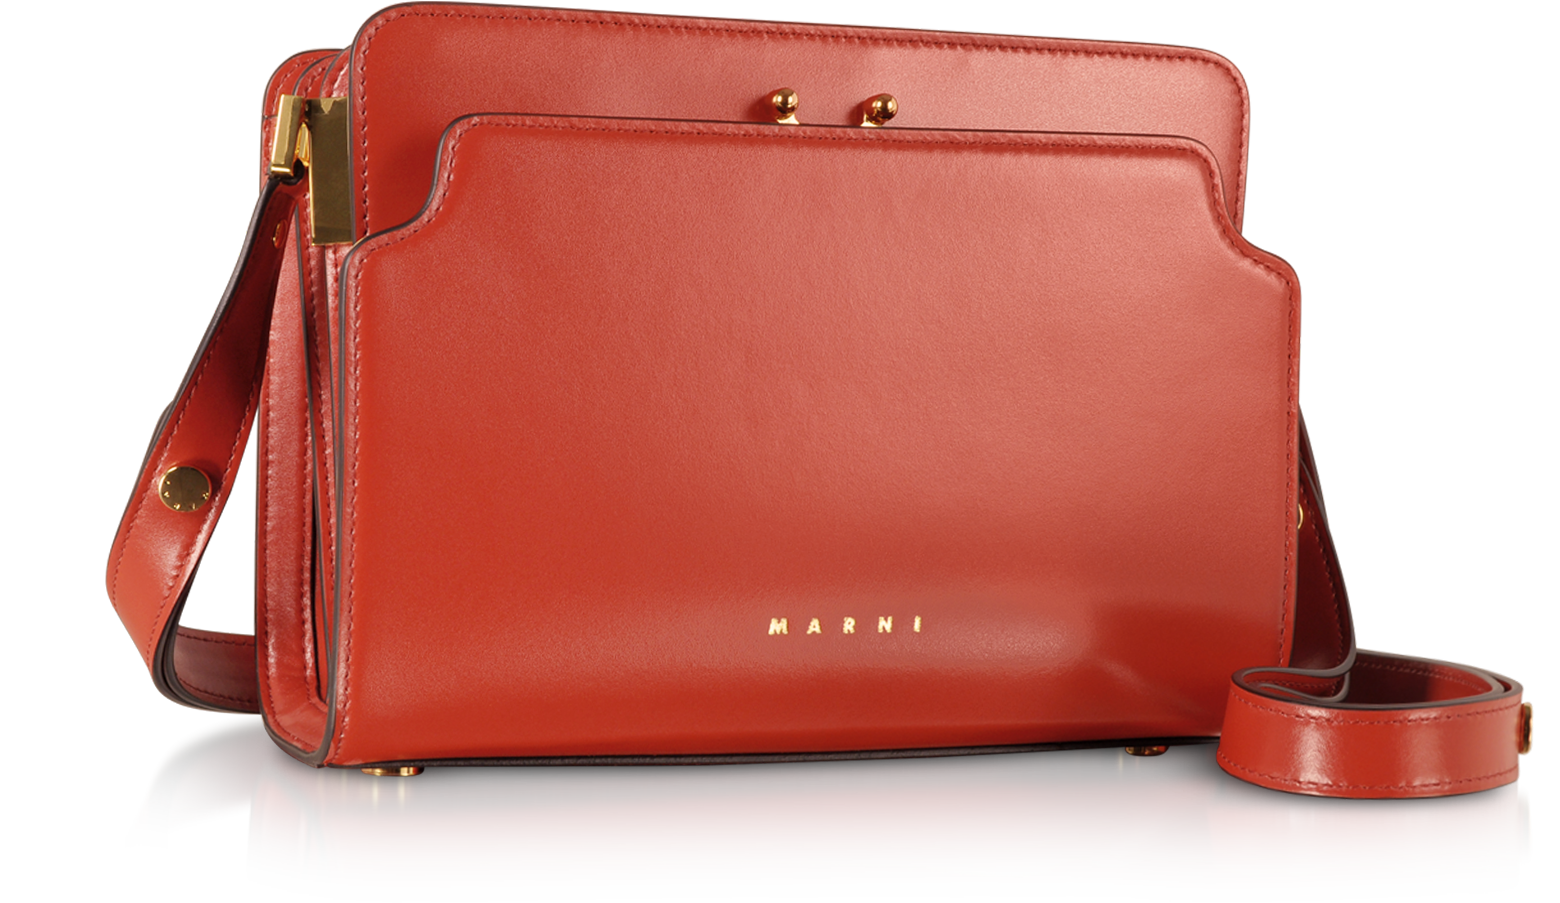 Marni Red Trunk Reverse Leather Shoulder Bag at FORZIERI